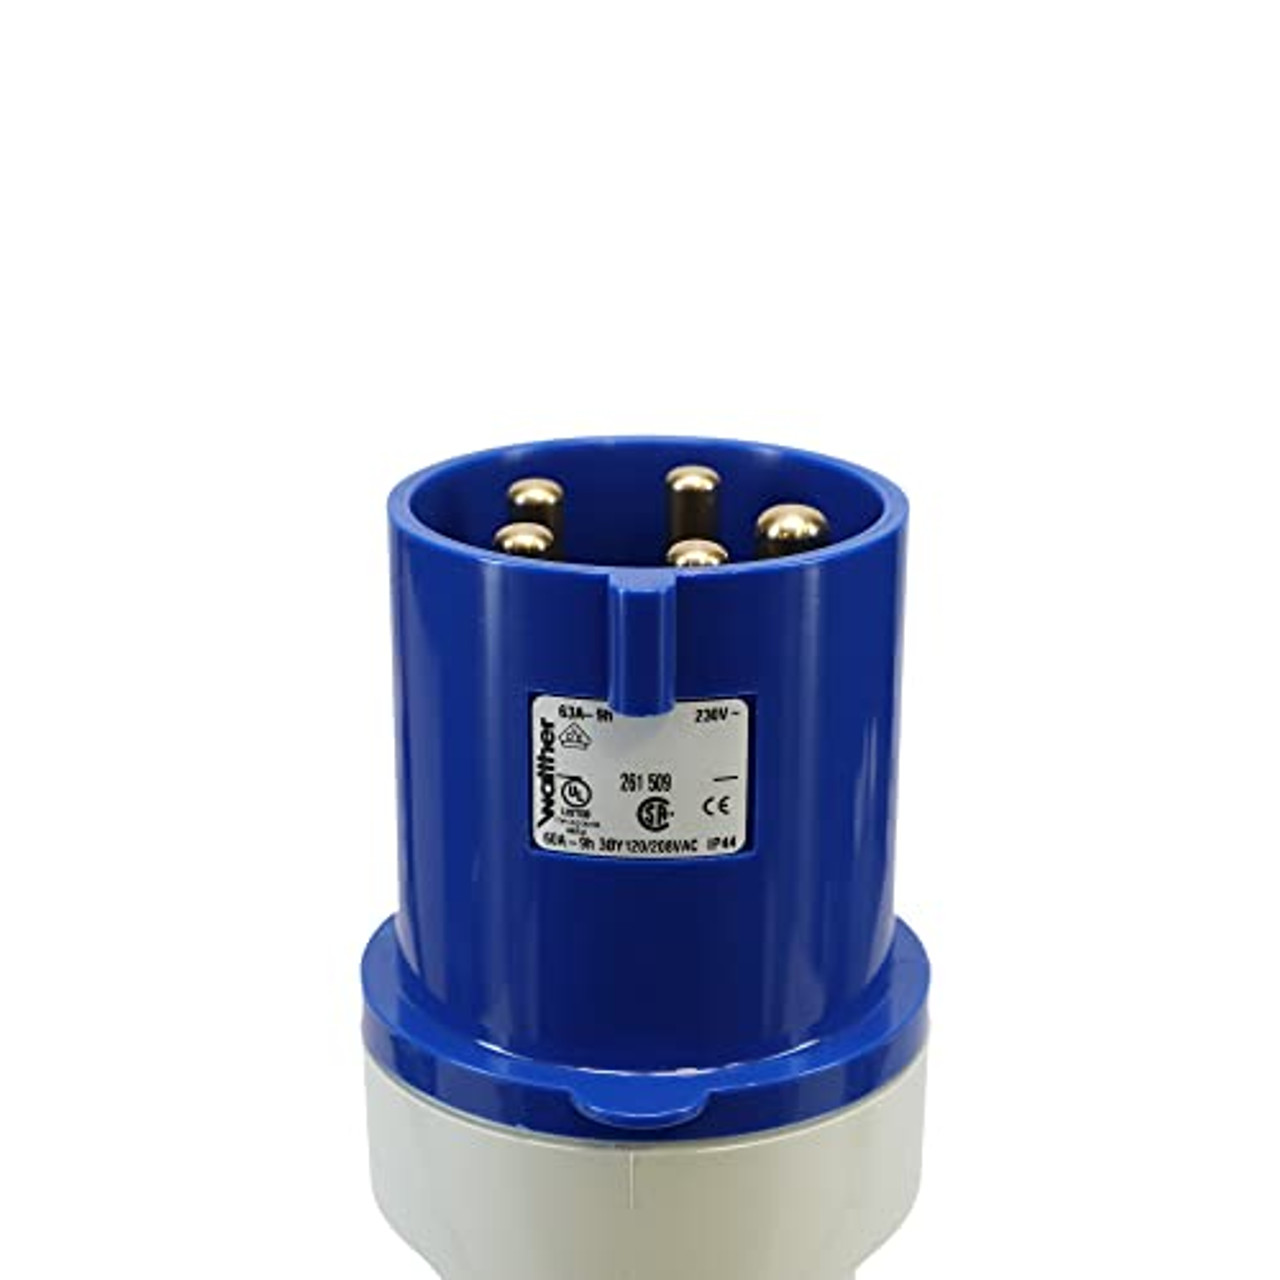 Walther Electric 261509 Pin and Sleeve Plug 60A/63A 5 Wire 3ØY 120/208 VAC 9Hr IP44 Splashproof - 560C9 Industrial Grade IEC (Blue)